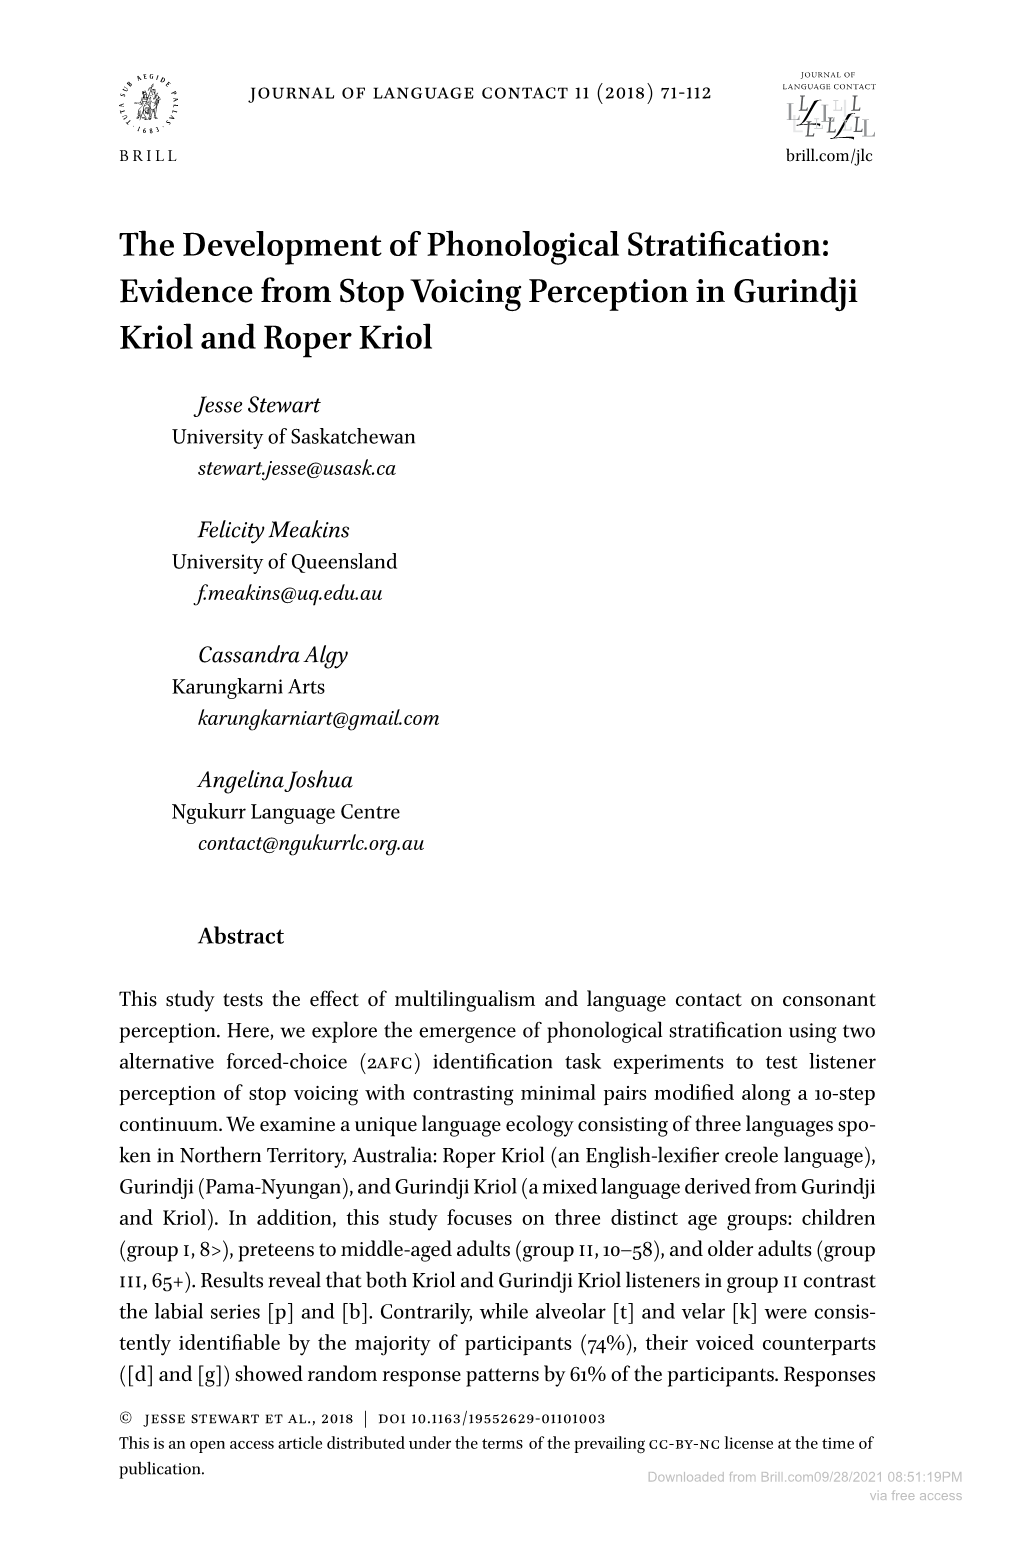 The Development of Phonological Stratification: Evidence from Stop Voicing Perception in Gurindji Kriol and Roper Kriol